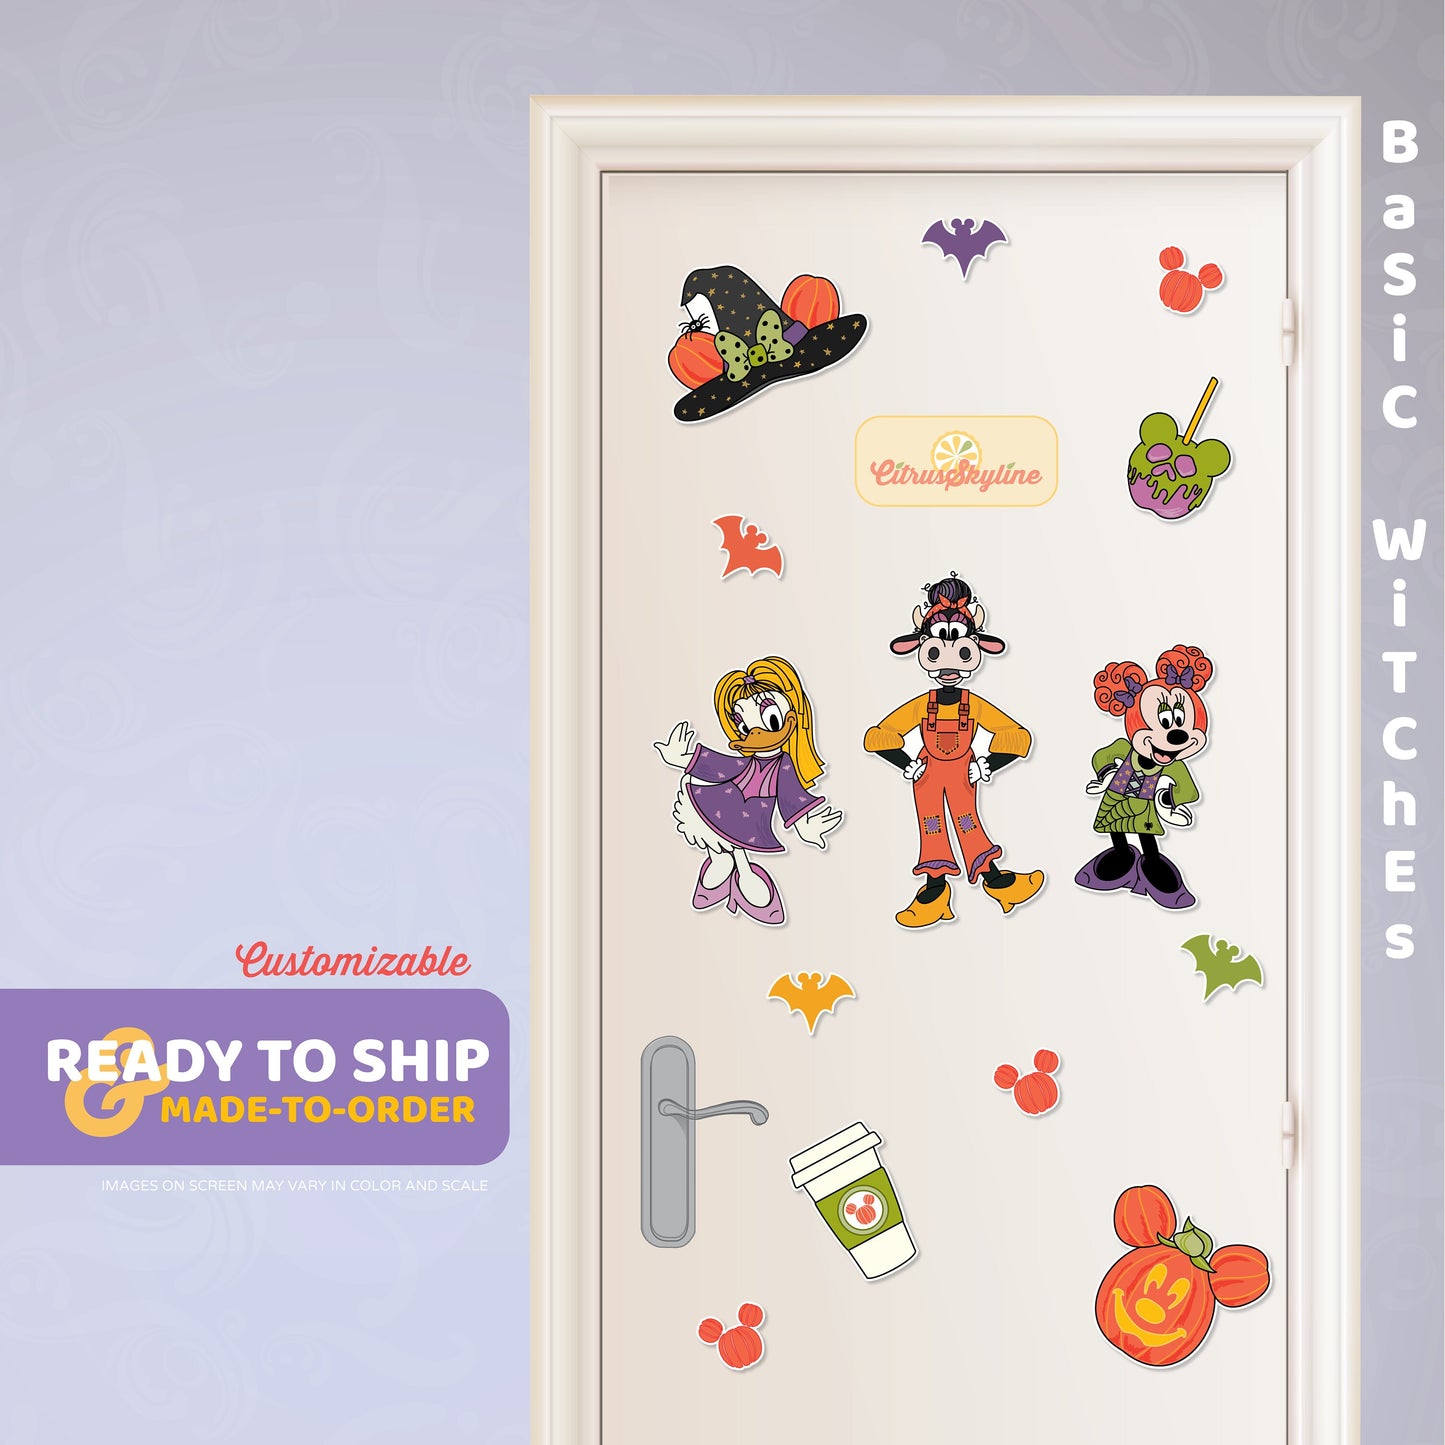 Cruise Gift Tags with the Boo To You Halloween Theme from CitrusSkyline for Fish Extender, Pixie Gifting, or Cast Member Appreciation Gift